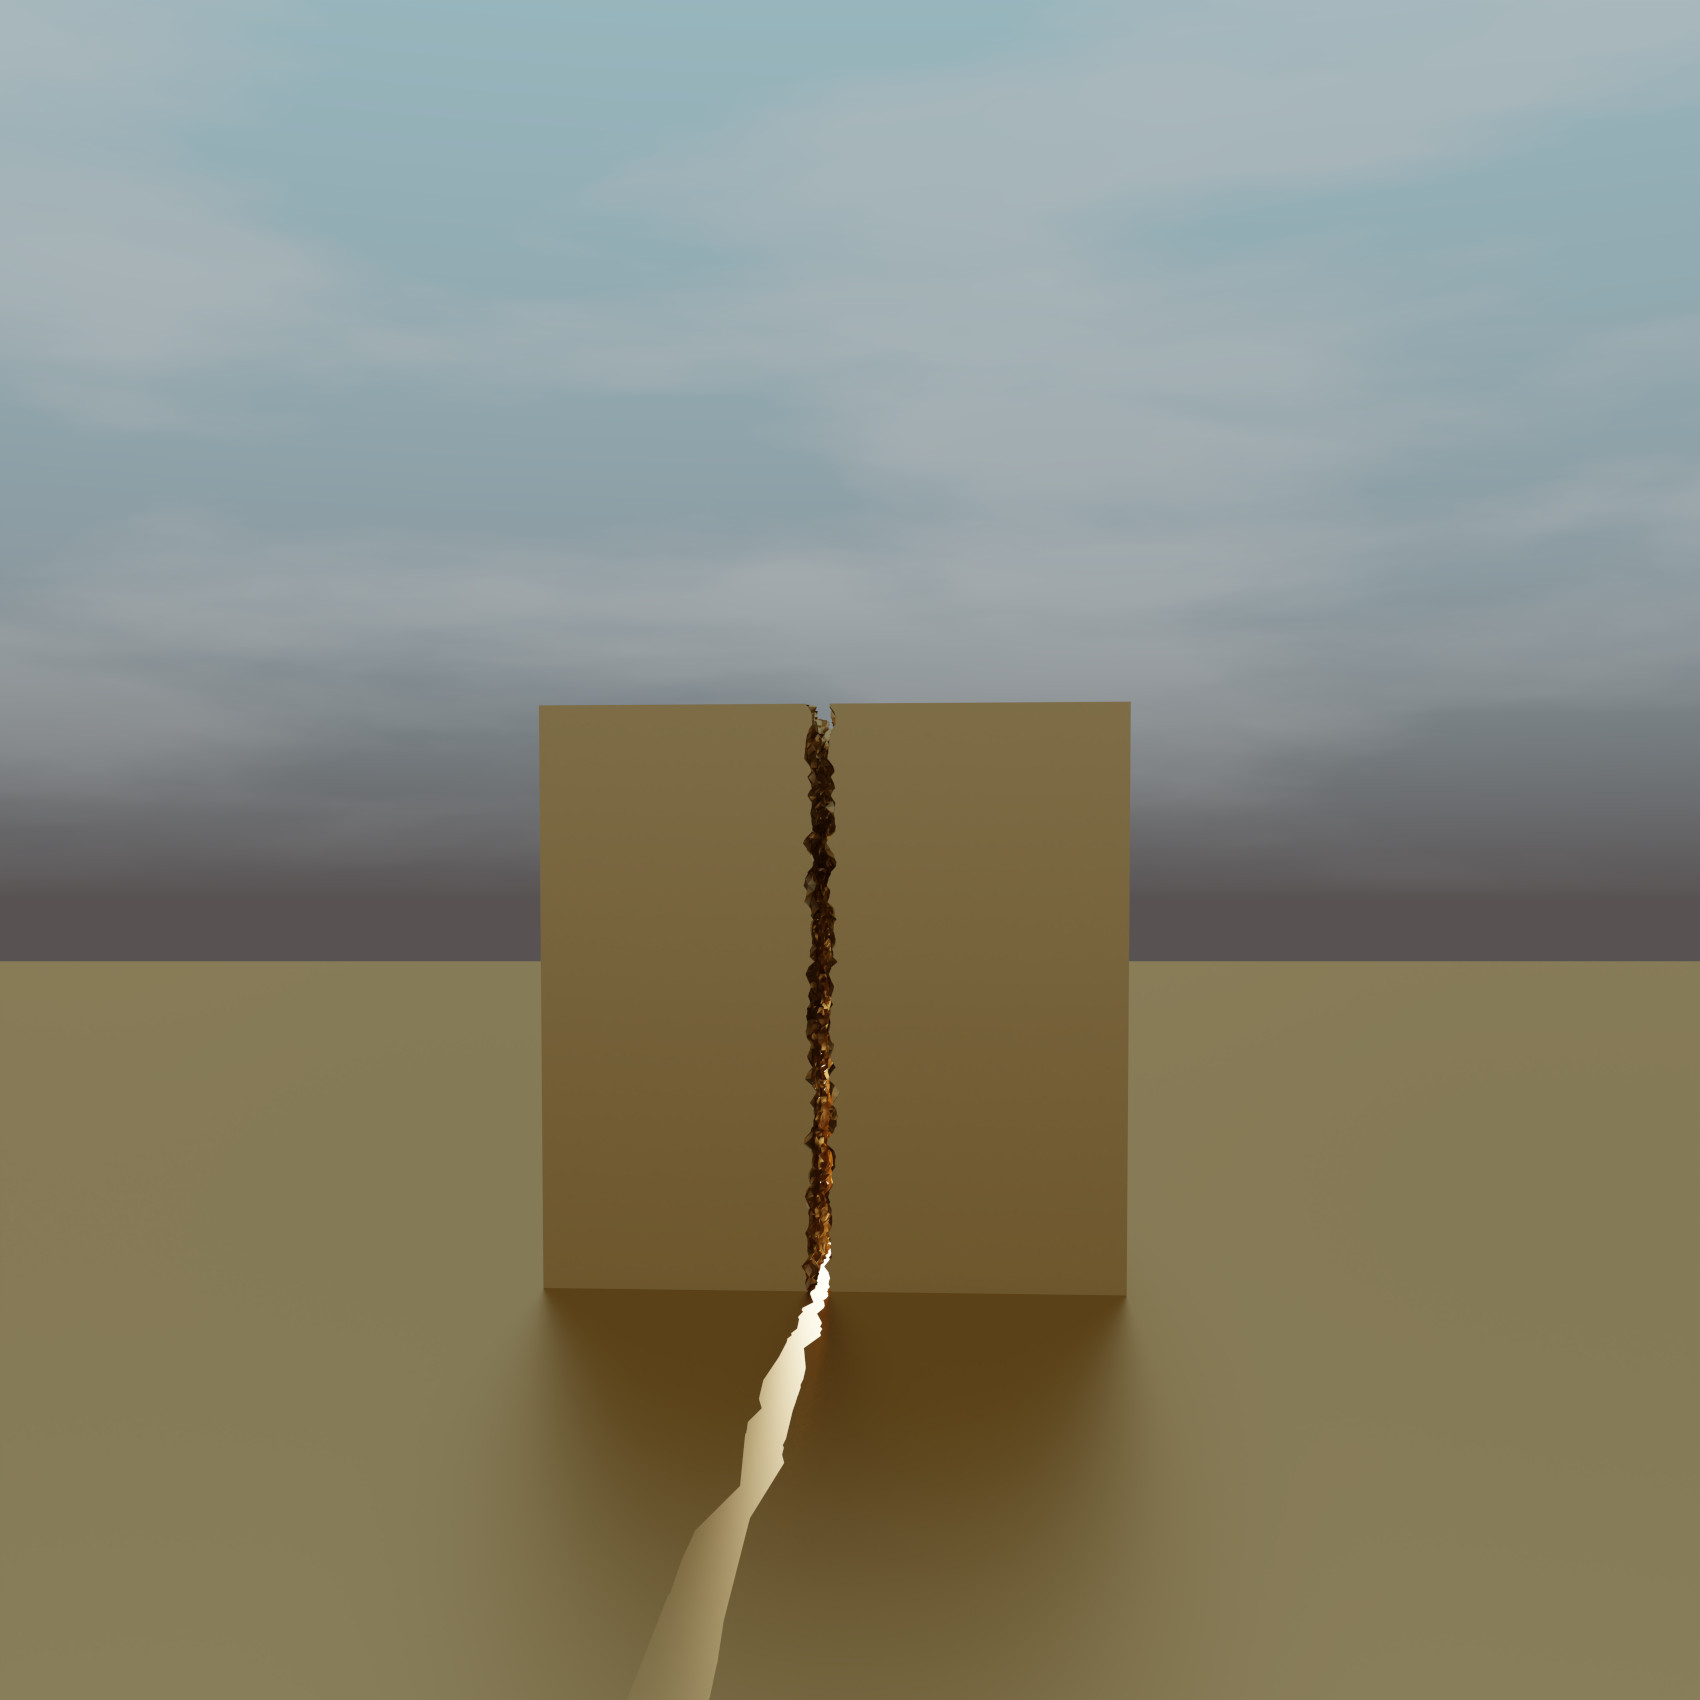 Virtual abstract scenery, Abstract digital art, Raytracing, Computer-rendered image, 2022. A golden cube breaks in half in front of a cloudy sky. From its centre emerges a mysterious glow of light that illuminates the ground.